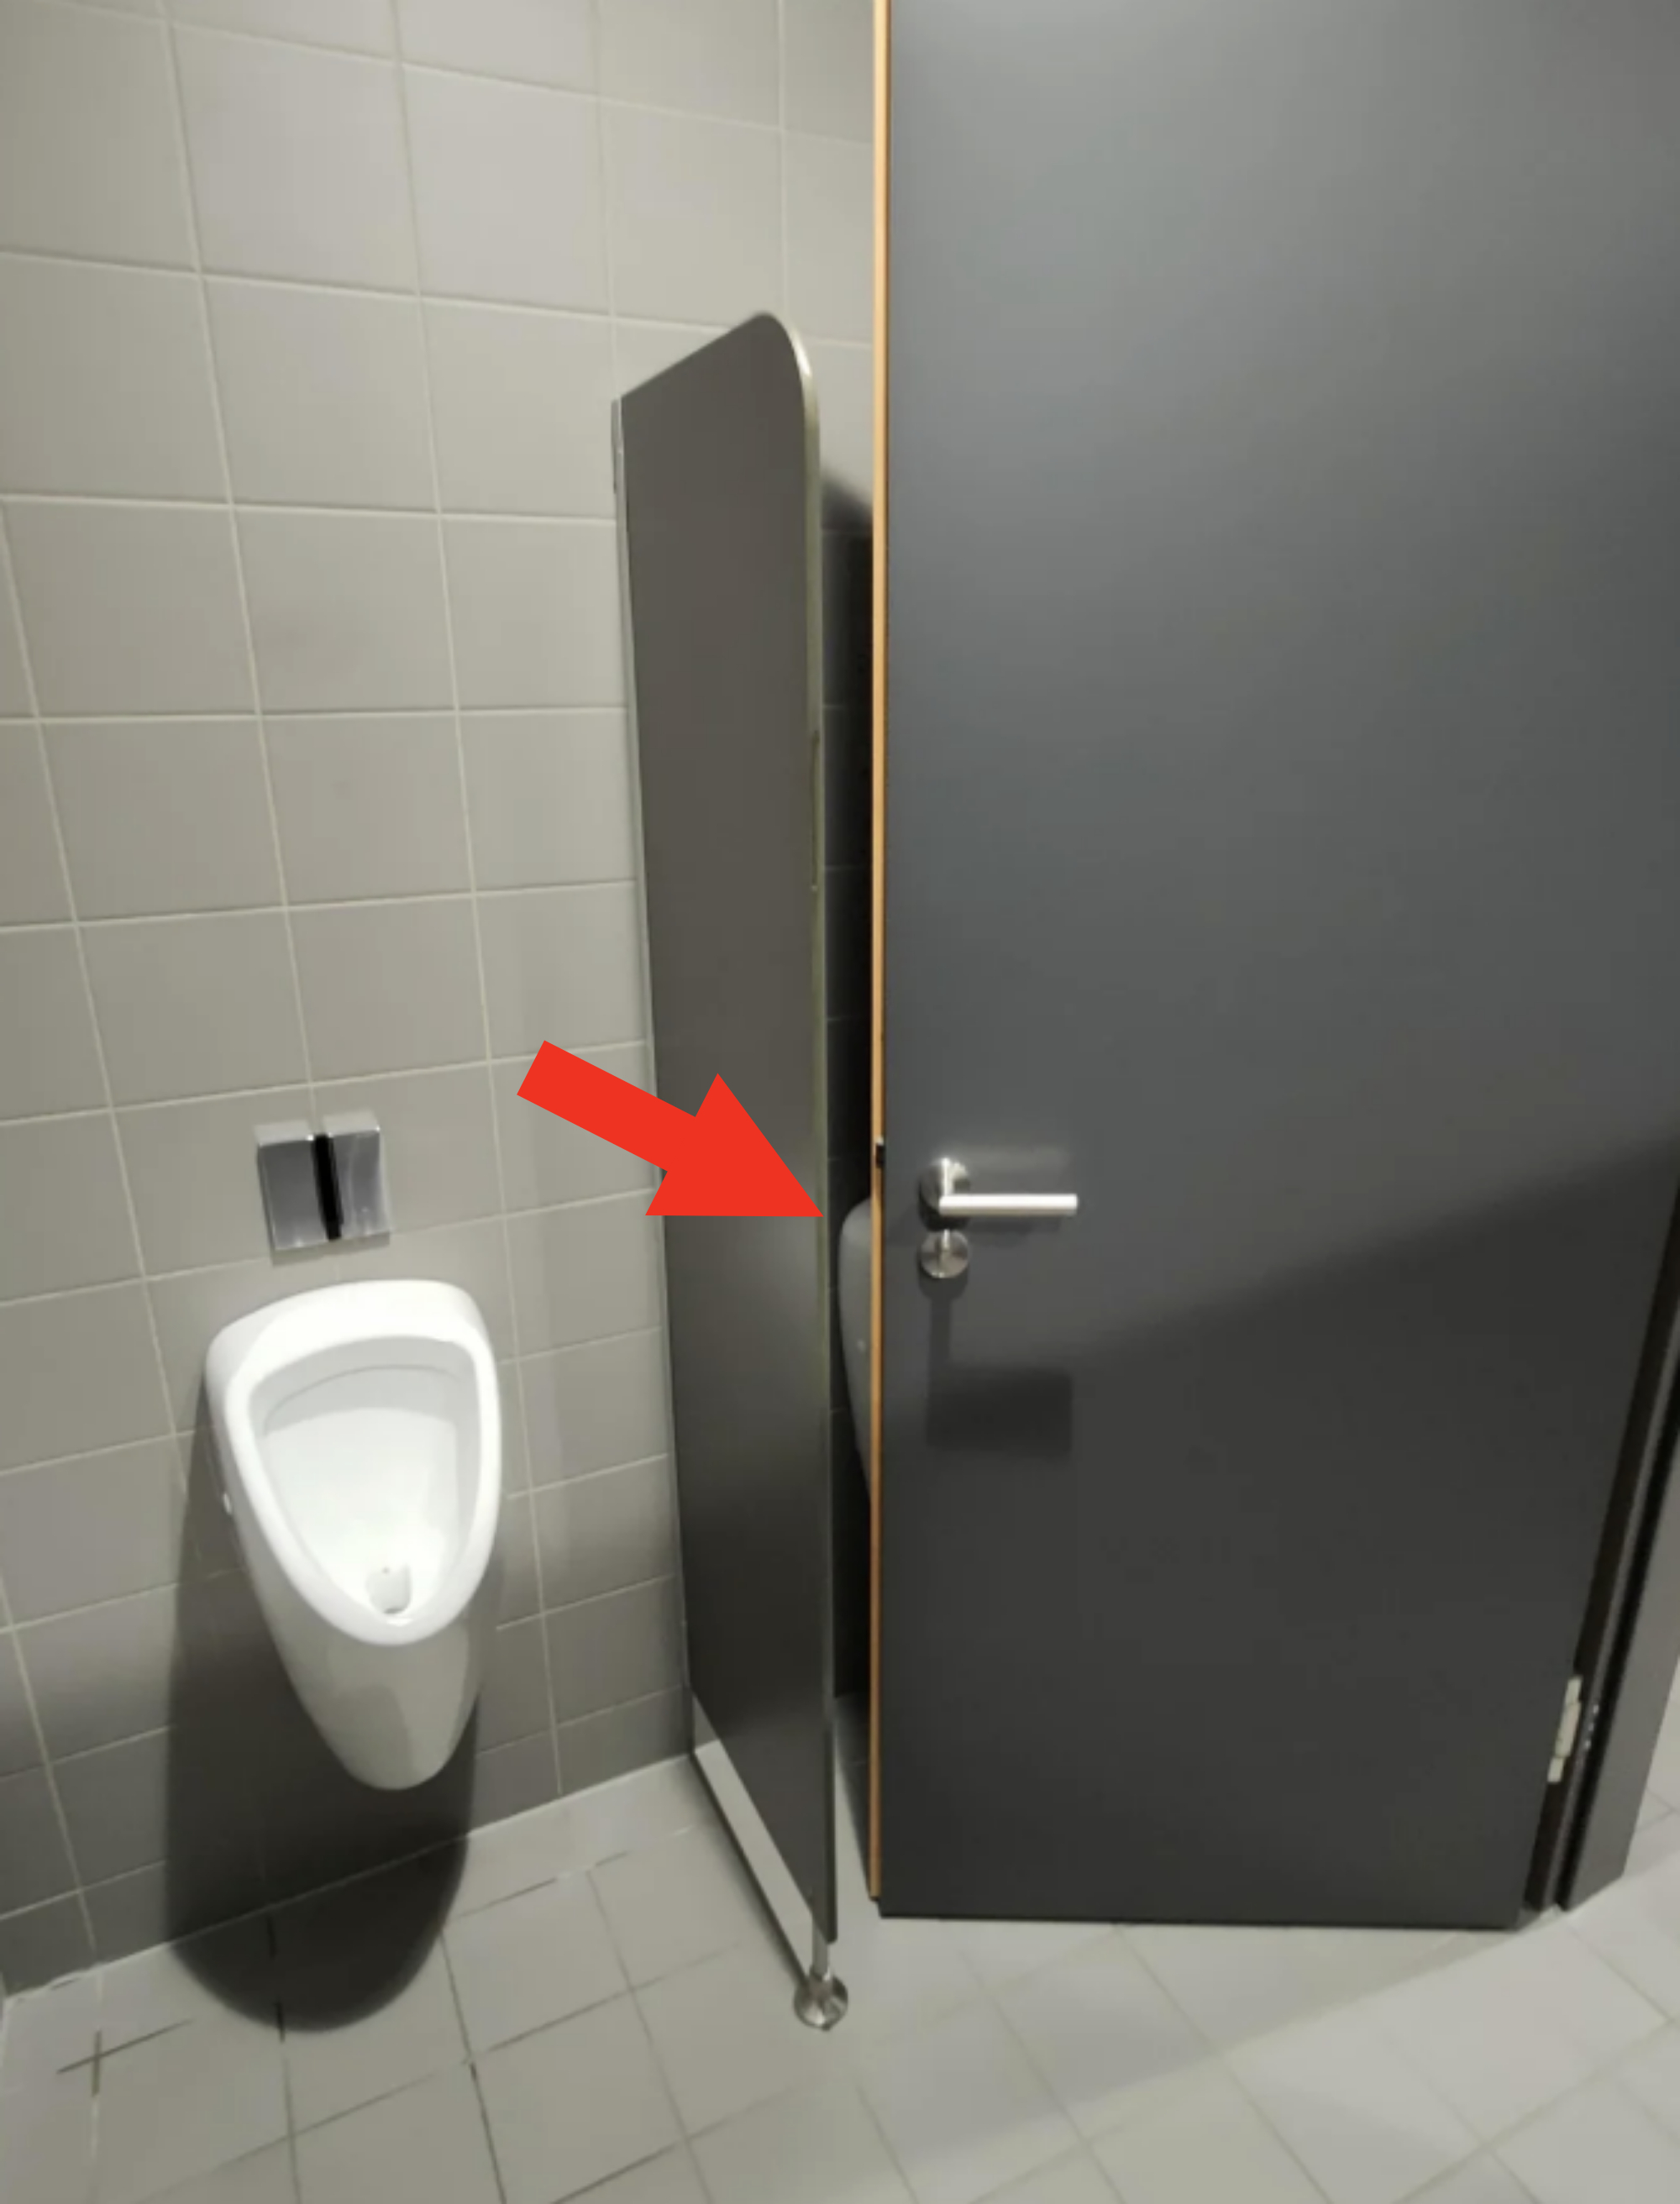 A urinal partially obstructed by a stall door in a restroom